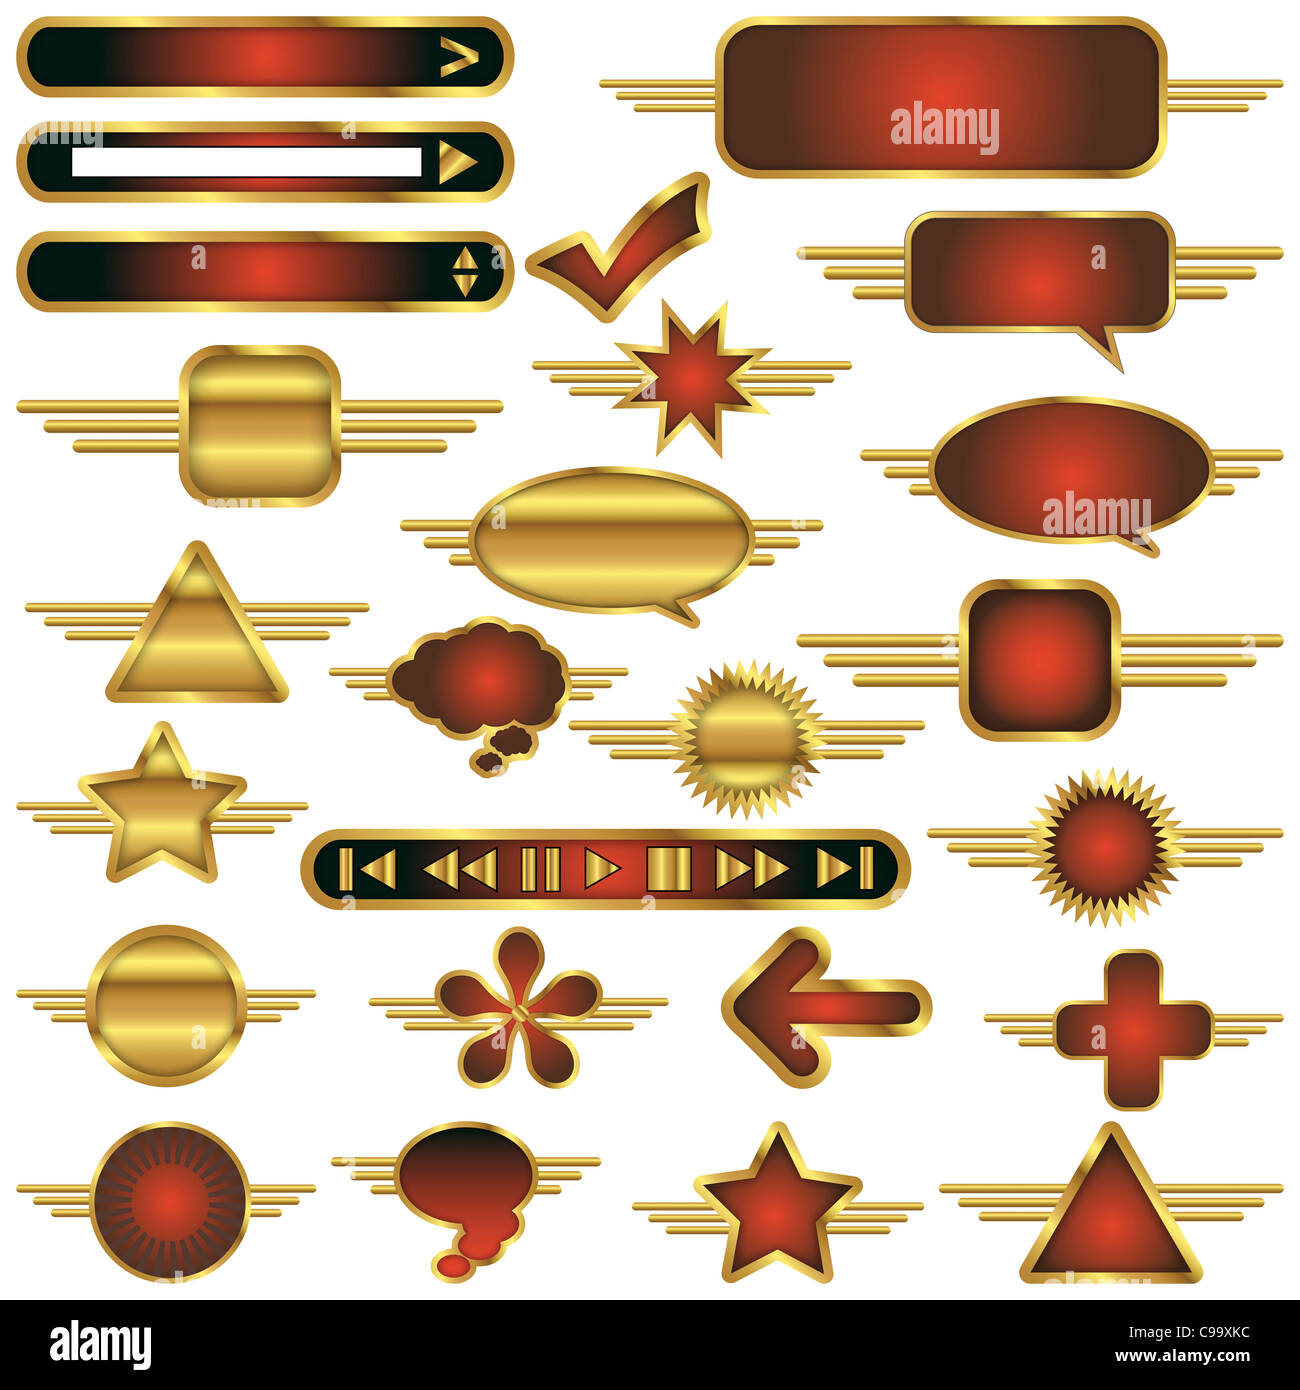 Collection of web design symbol graphics and icons in gold and red. Stock Photo